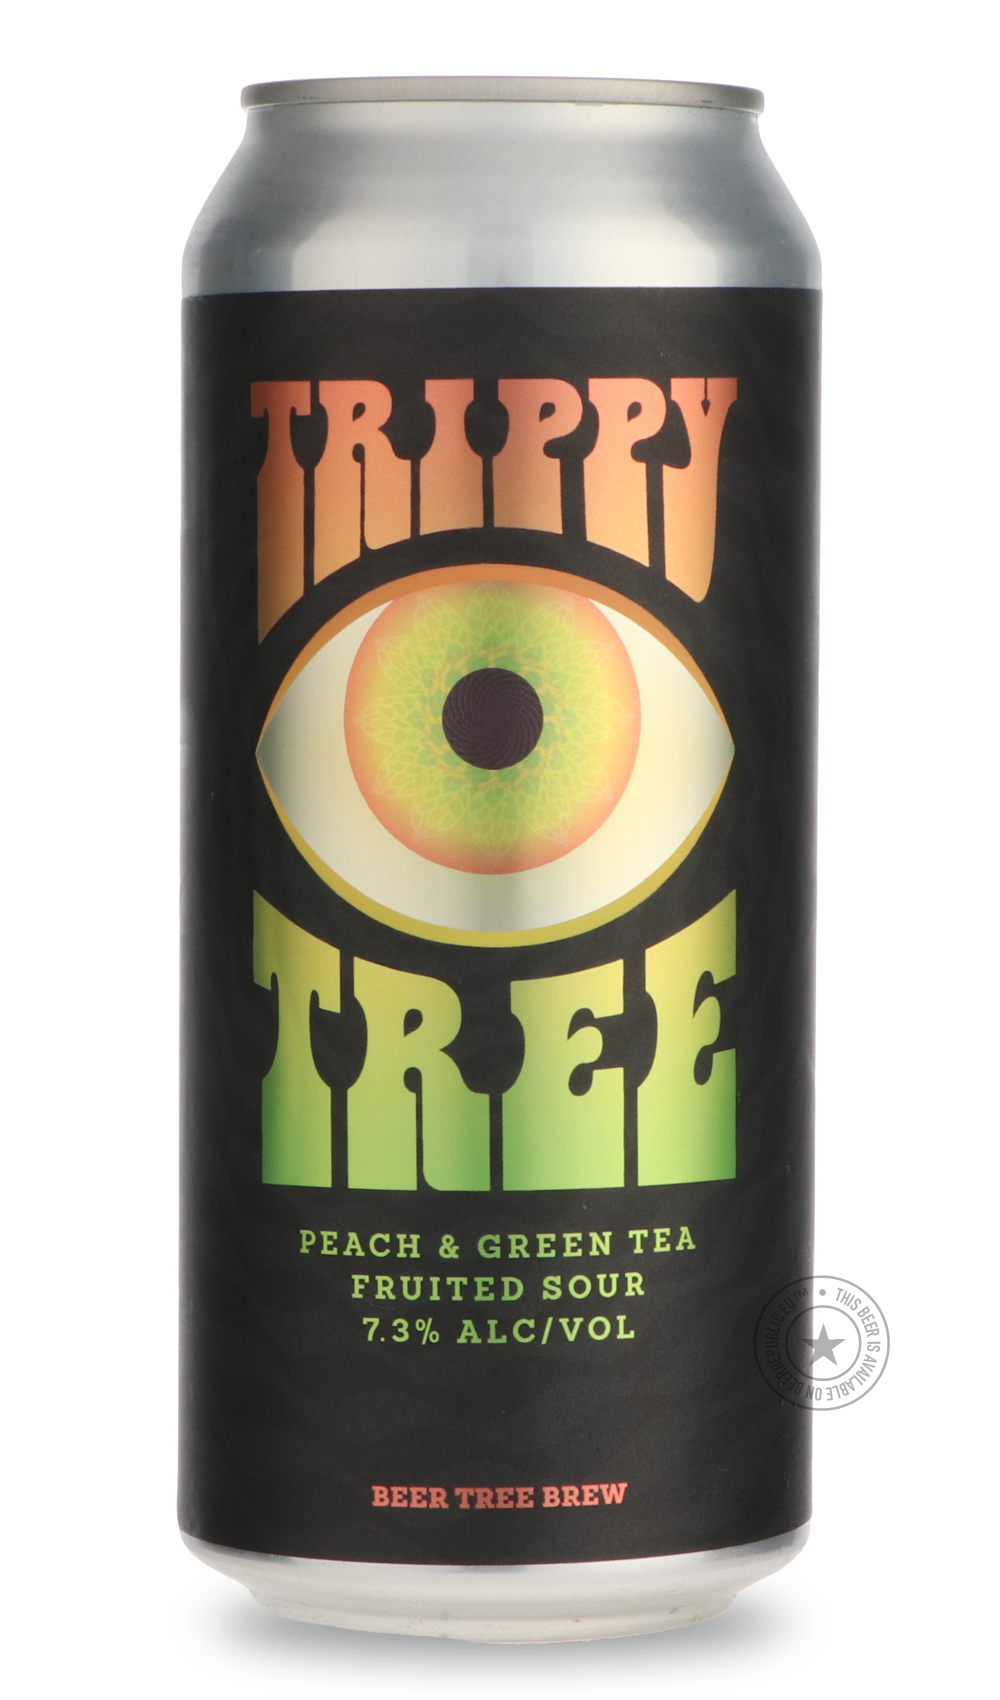 -Beer Tree- Trippy Tree: Peach & Green Tea-Sour / Wild & Fruity- Only @ Beer Republic - The best online beer store for American & Canadian craft beer - Buy beer online from the USA and Canada - Bier online kopen - Amerikaans bier kopen - Craft beer store - Craft beer kopen - Amerikanisch bier kaufen - Bier online kaufen - Acheter biere online - IPA - Stout - Porter - New England IPA - Hazy IPA - Imperial Stout - Barrel Aged - Barrel Aged Imperial Stout - Brown - Dark beer - Blond - Blonde - Pilsner - Lager 